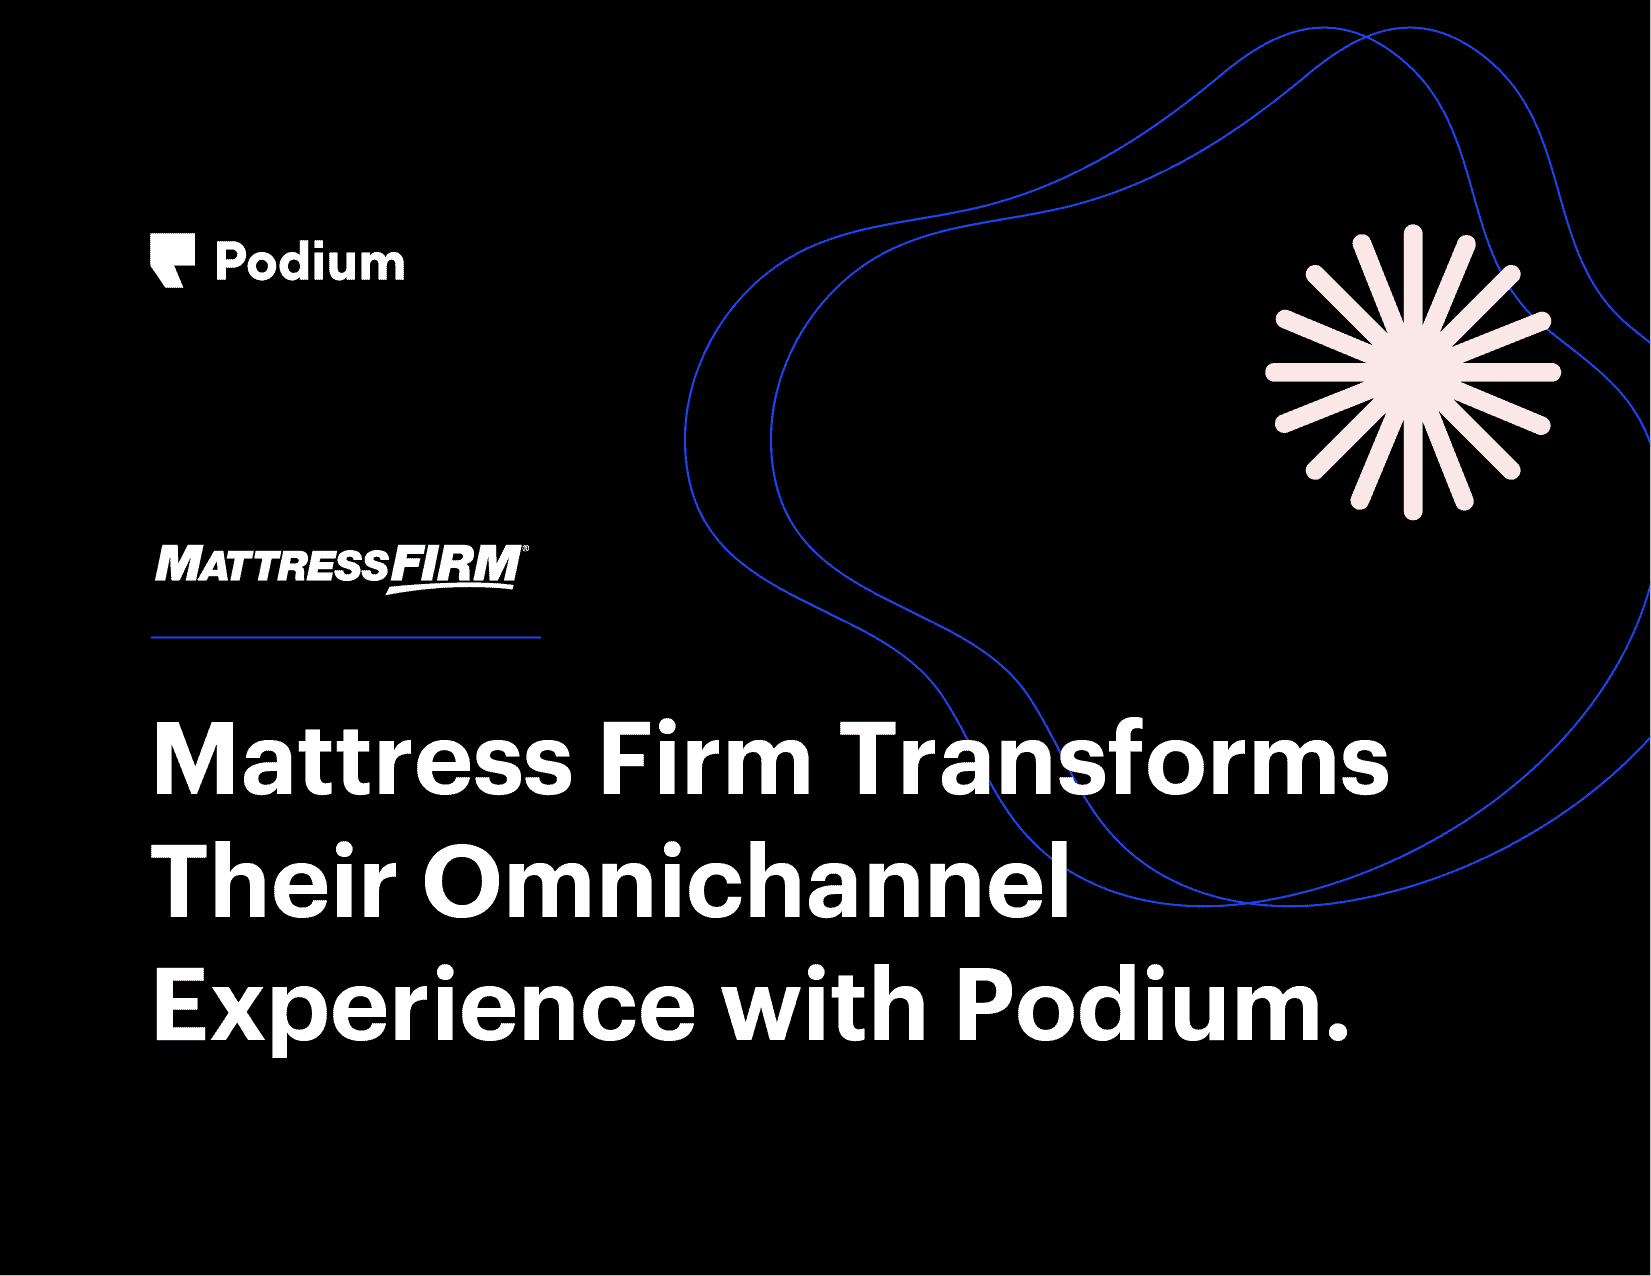 Mattress Firm transforms their omnichannel experience with Podium.